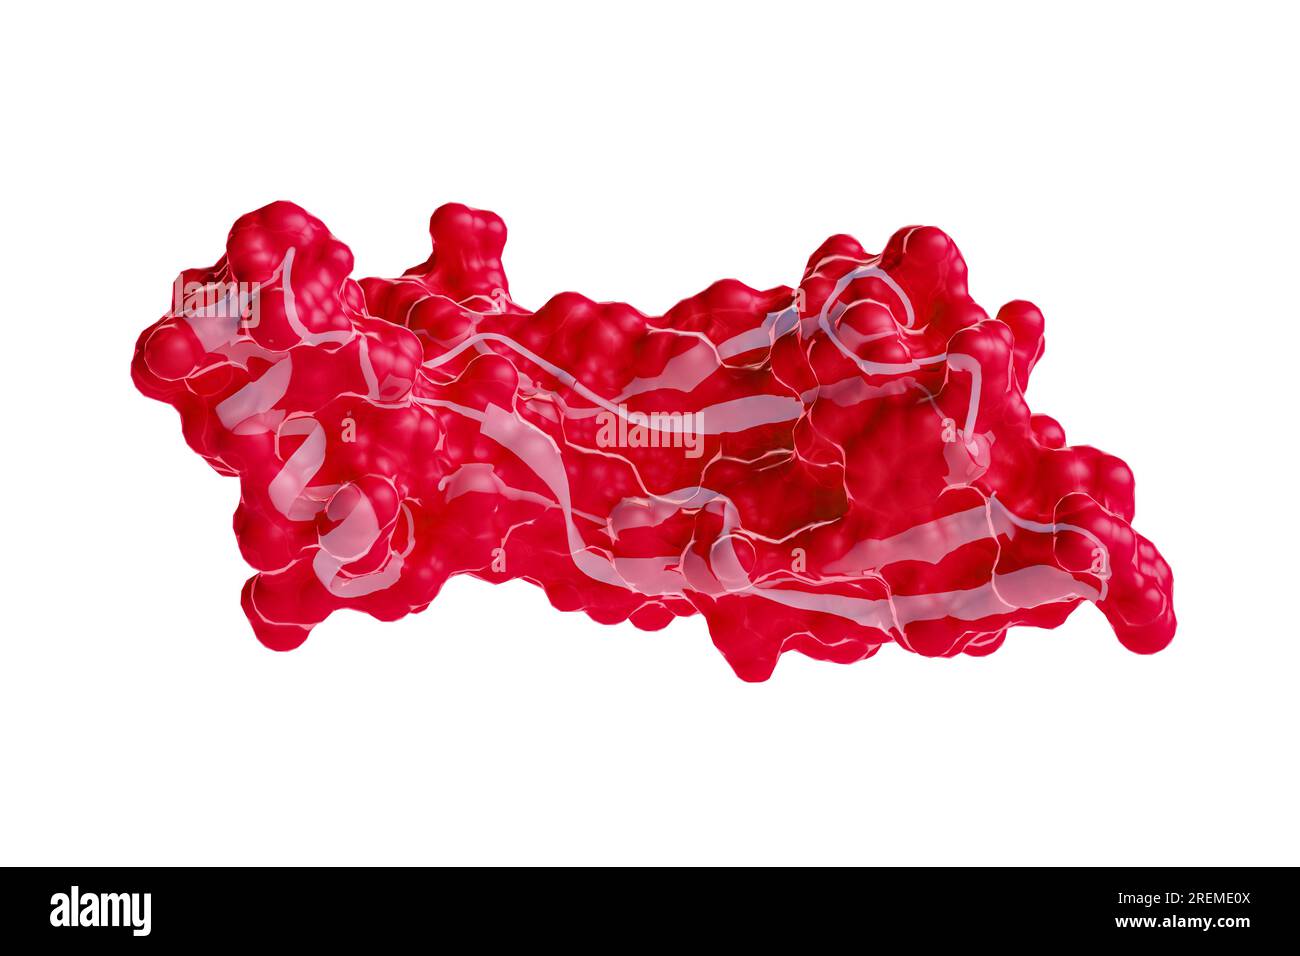 Illustration of human GDF15 (growth differentiation factor 15) protein showing molecular surface (red) and ribbon (white) models. GDF15 is produced by organs in response to stress and is also found at high levels in the placenta. It has been proposed to contribute to morning sickness. Stock Photo